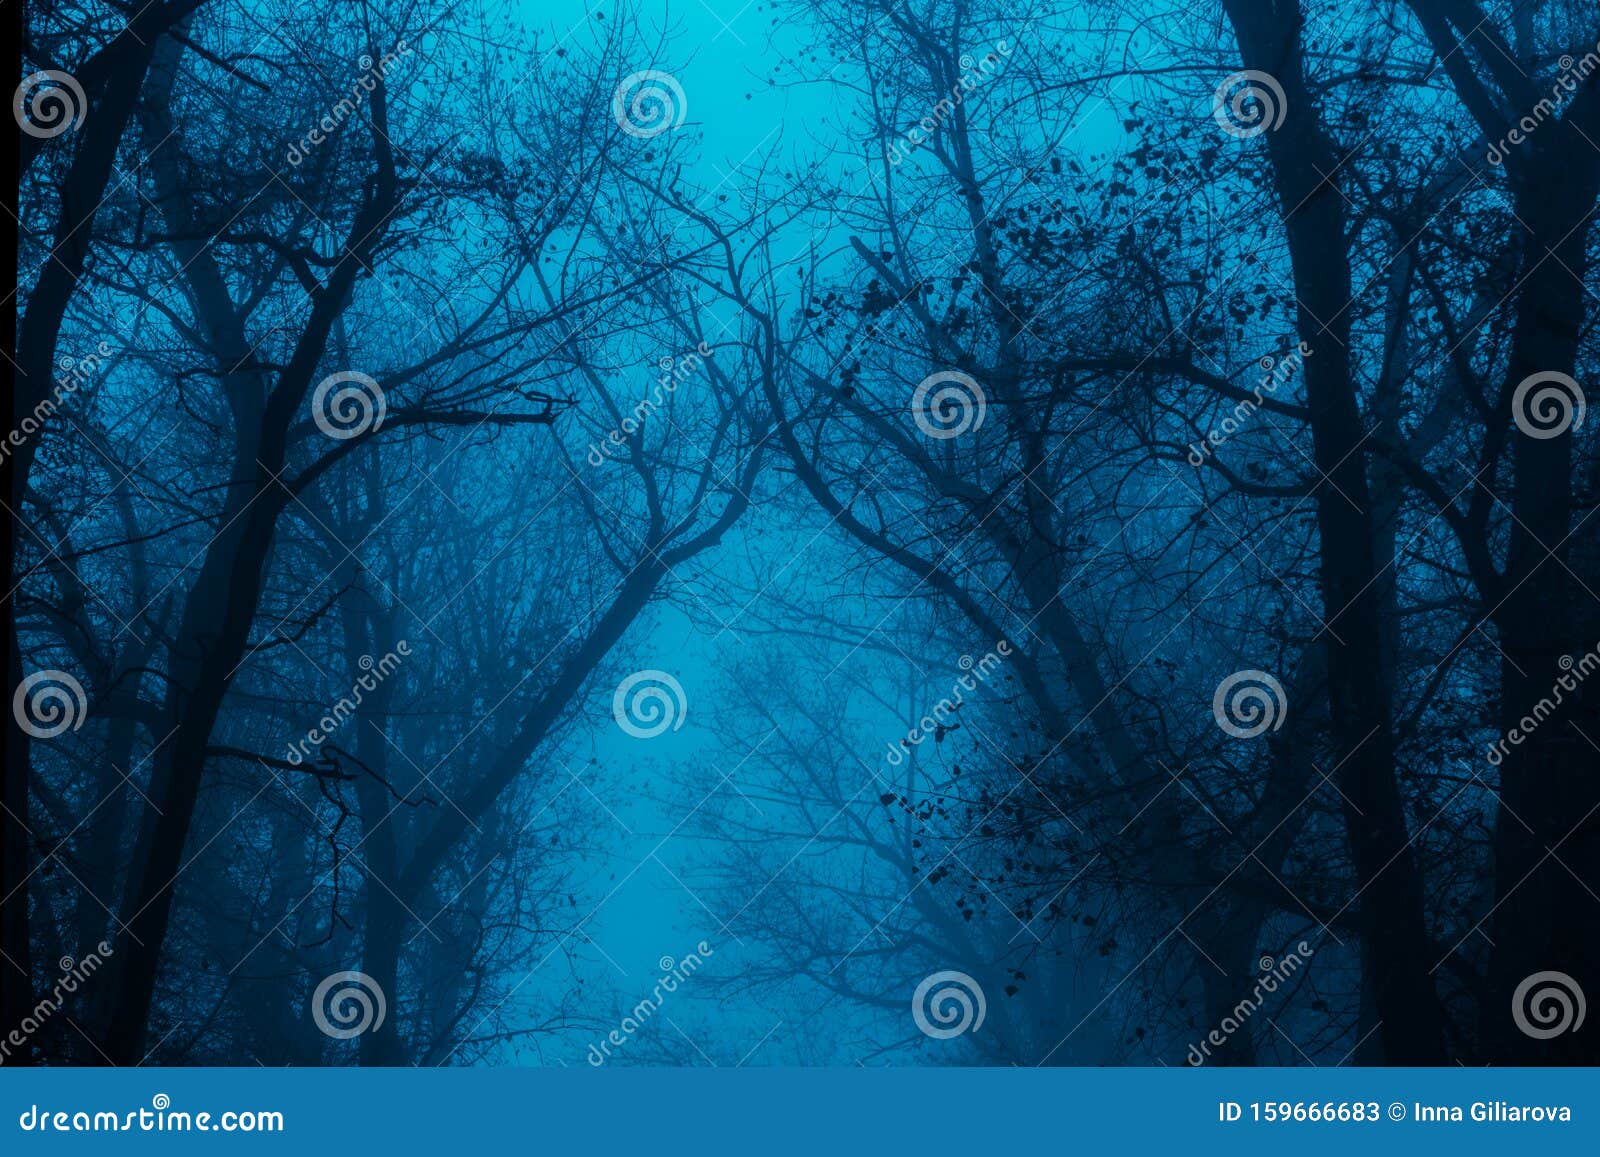 Foggy Silhouettes of Trunks and Branches Stock Image - Image of fall